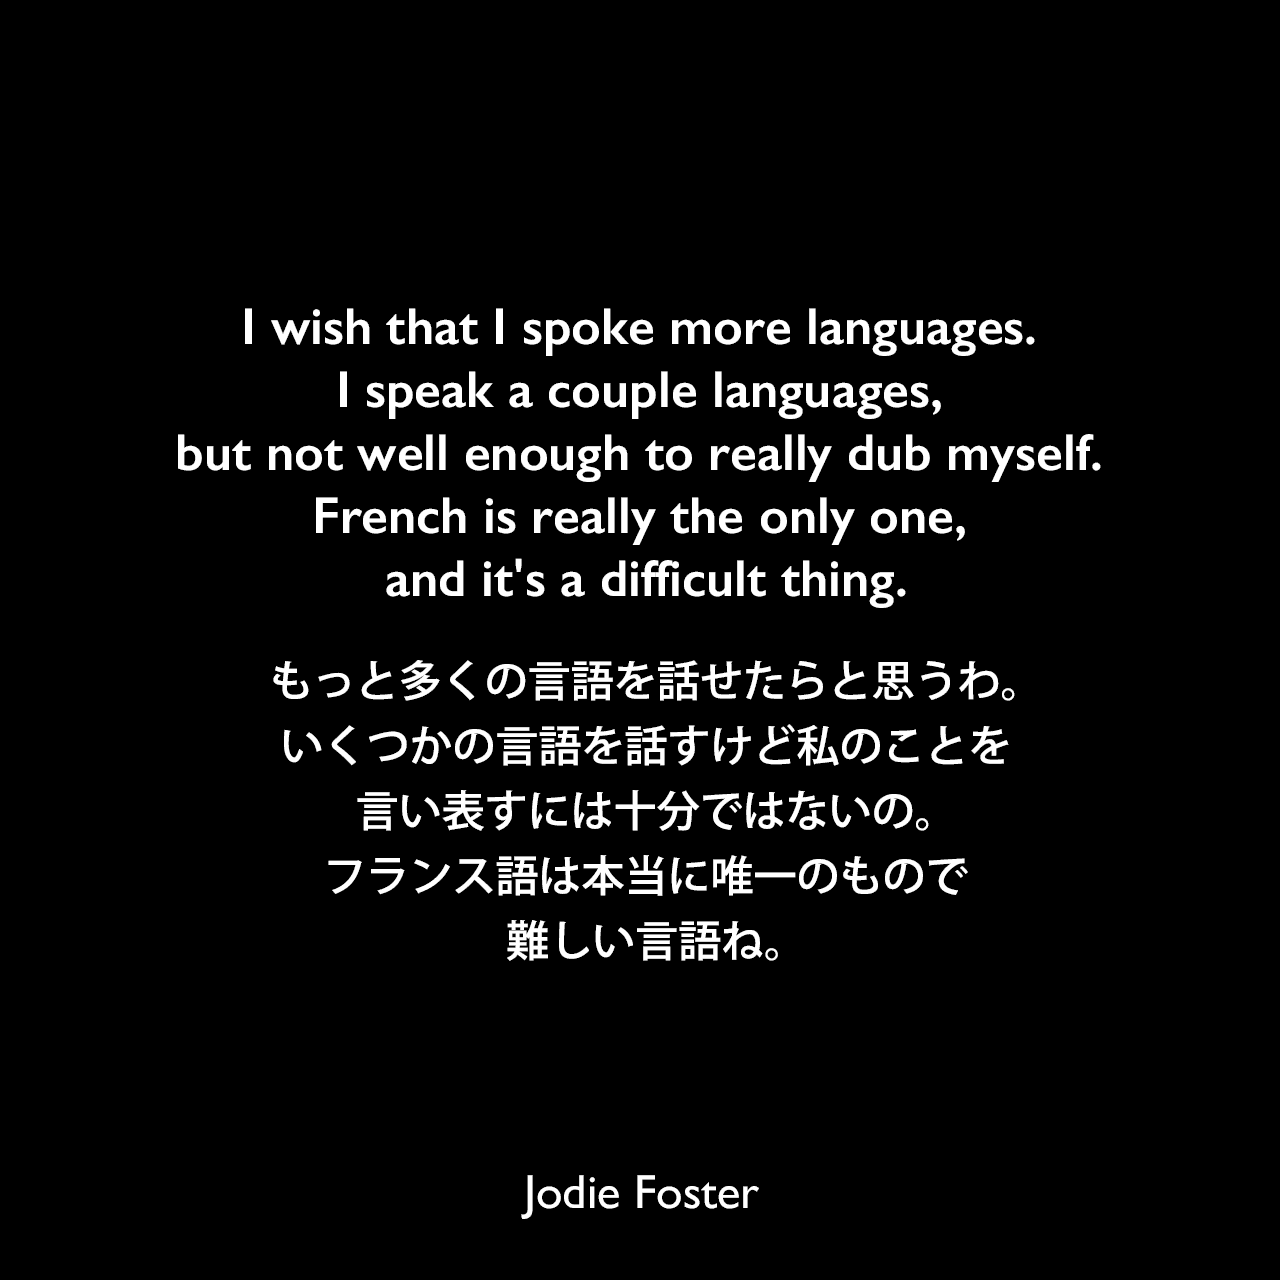 I wish that I spoke more languages. I speak a couple languages, but not well enough to really dub myself. French is really the only one, and it's a difficult thing.もっと多くの言語を話せたらと思うわ。いくつかの言語を話すけど私のことを言い表すには十分ではないの。フランス語は本当に唯一のもので、難しい言語ね。Jodie Foster